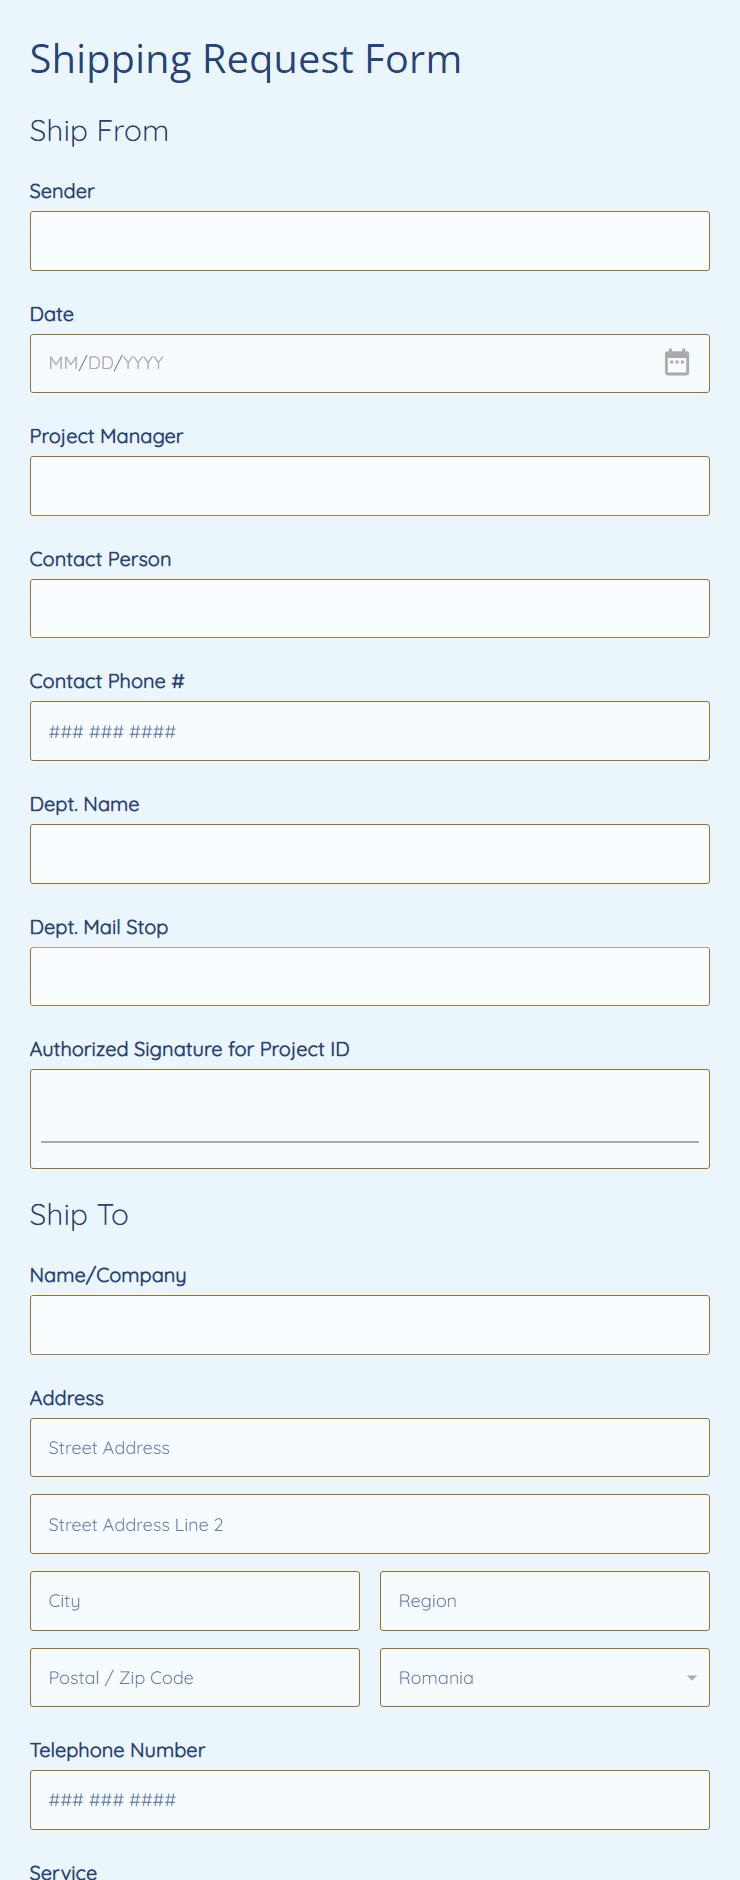 shipping-request-form-template-online-123-form-builder